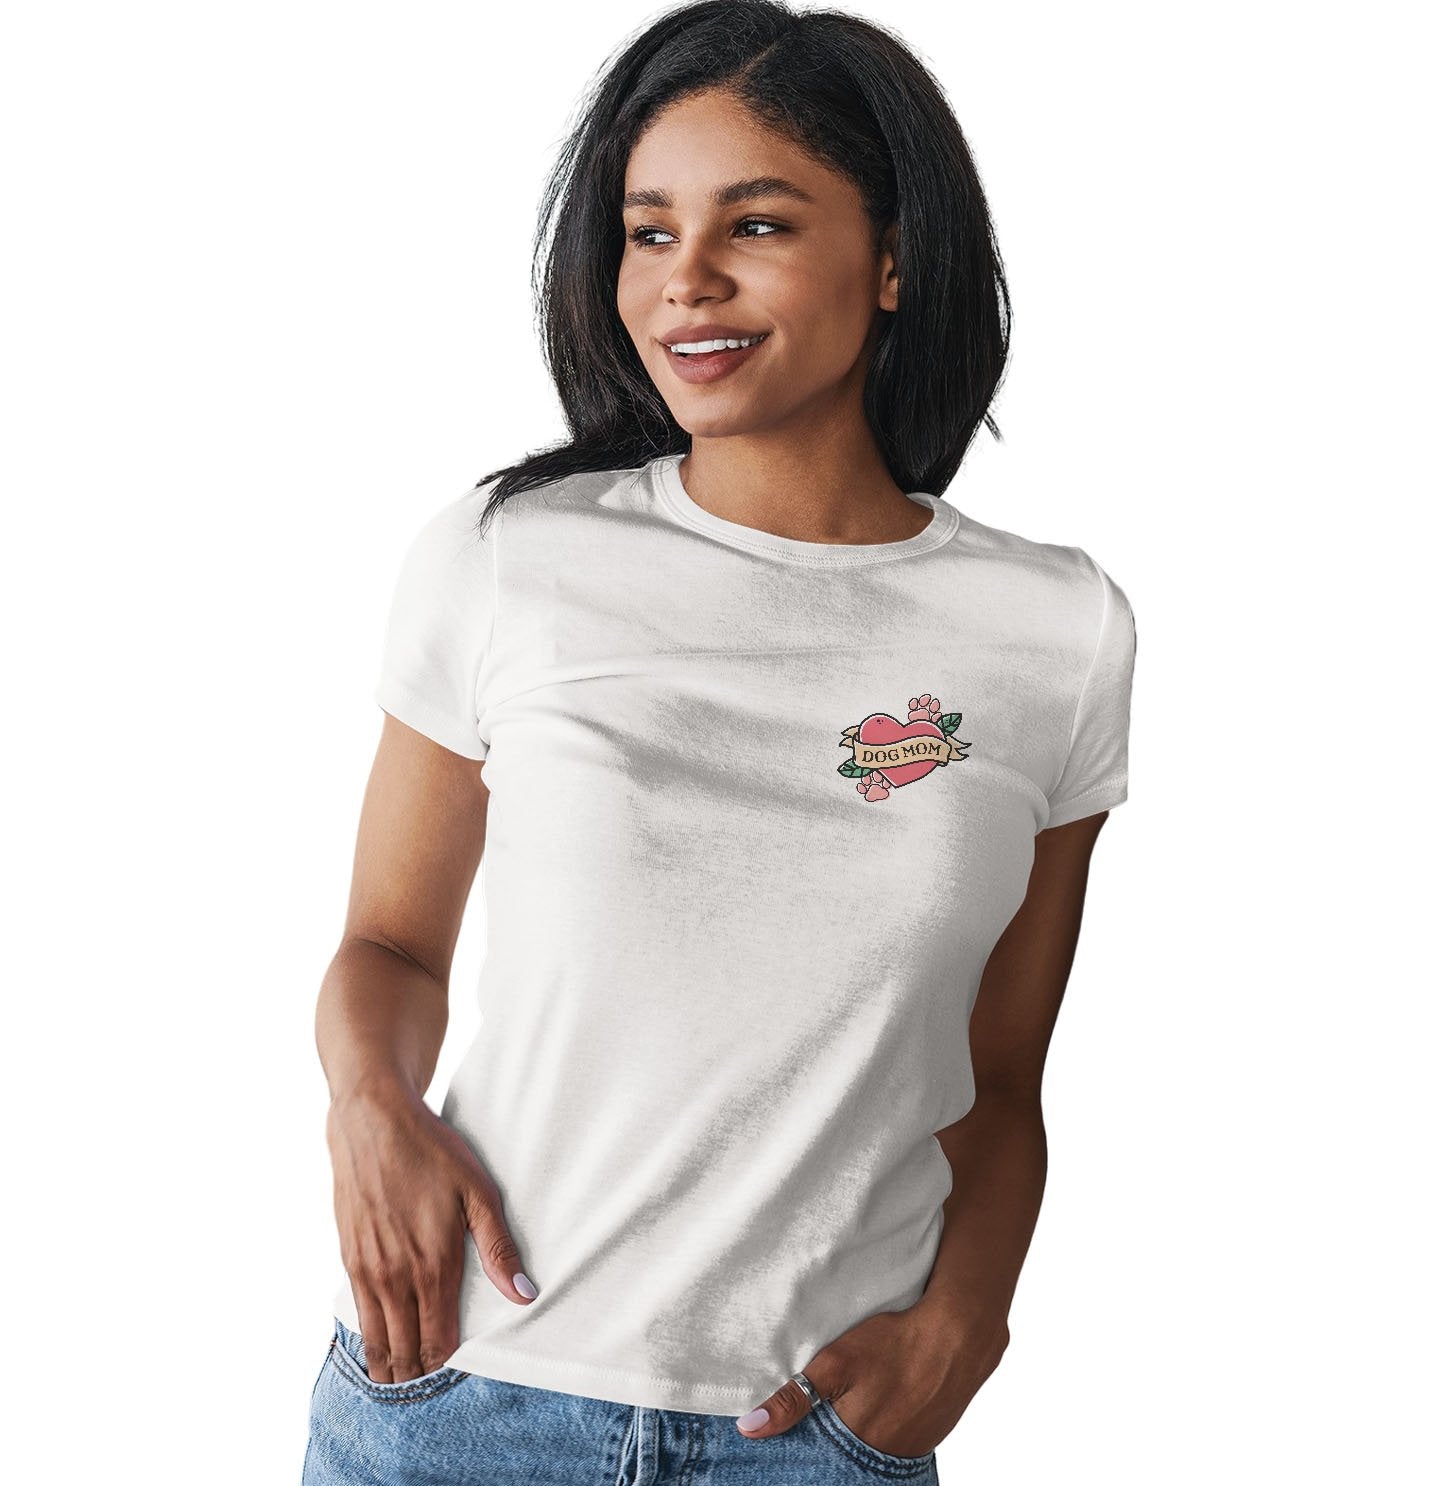 Dog Mom Heart - Pocket - Women's Fitted T-Shirt